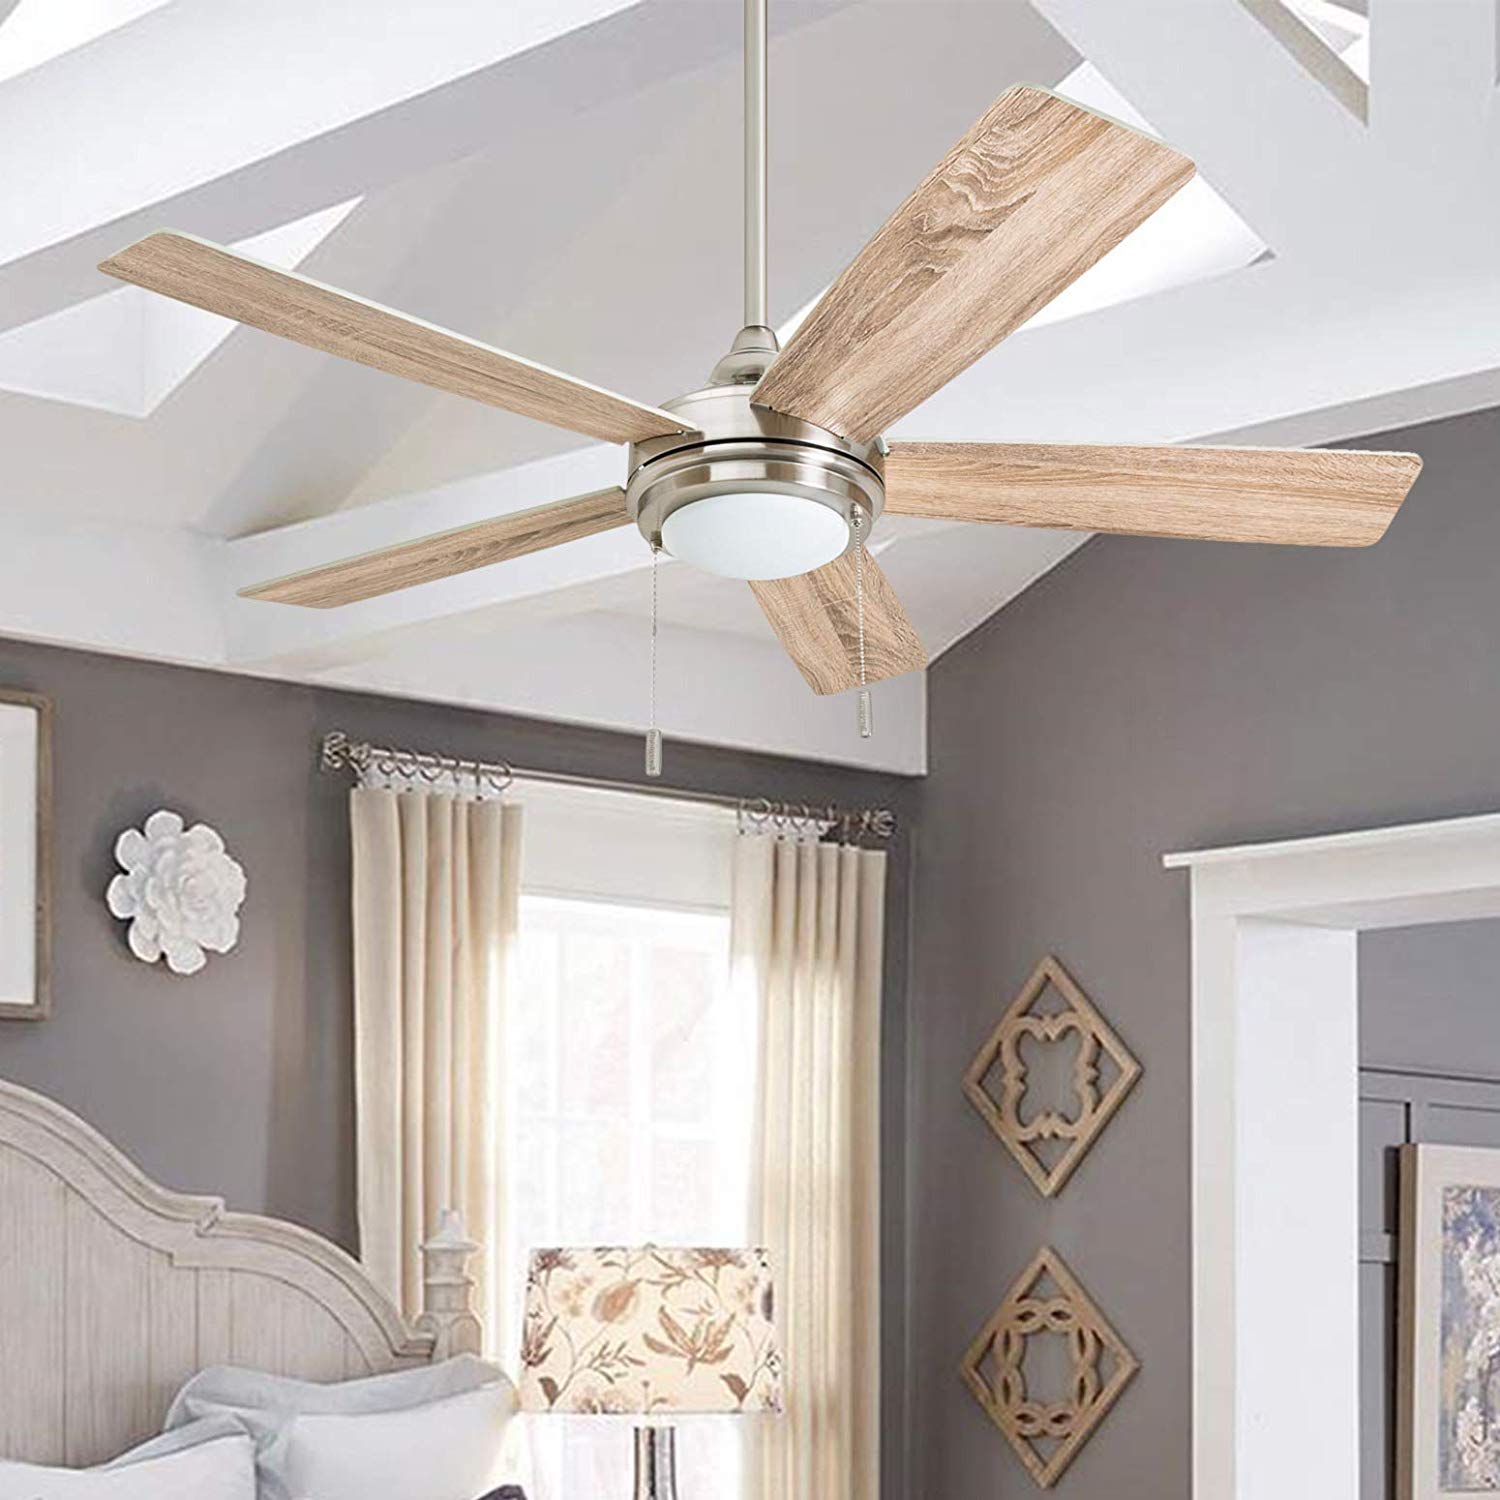 Honeywell Ceiling Fans Ventnor, 52 Inch Modern Farmhouse Indoor LED Ceiling Fan with Light, Pull Chain, Three Mounting Options, Dual Finish Blades, Reversible Motor - 50606-01 (Brushed Nickel)